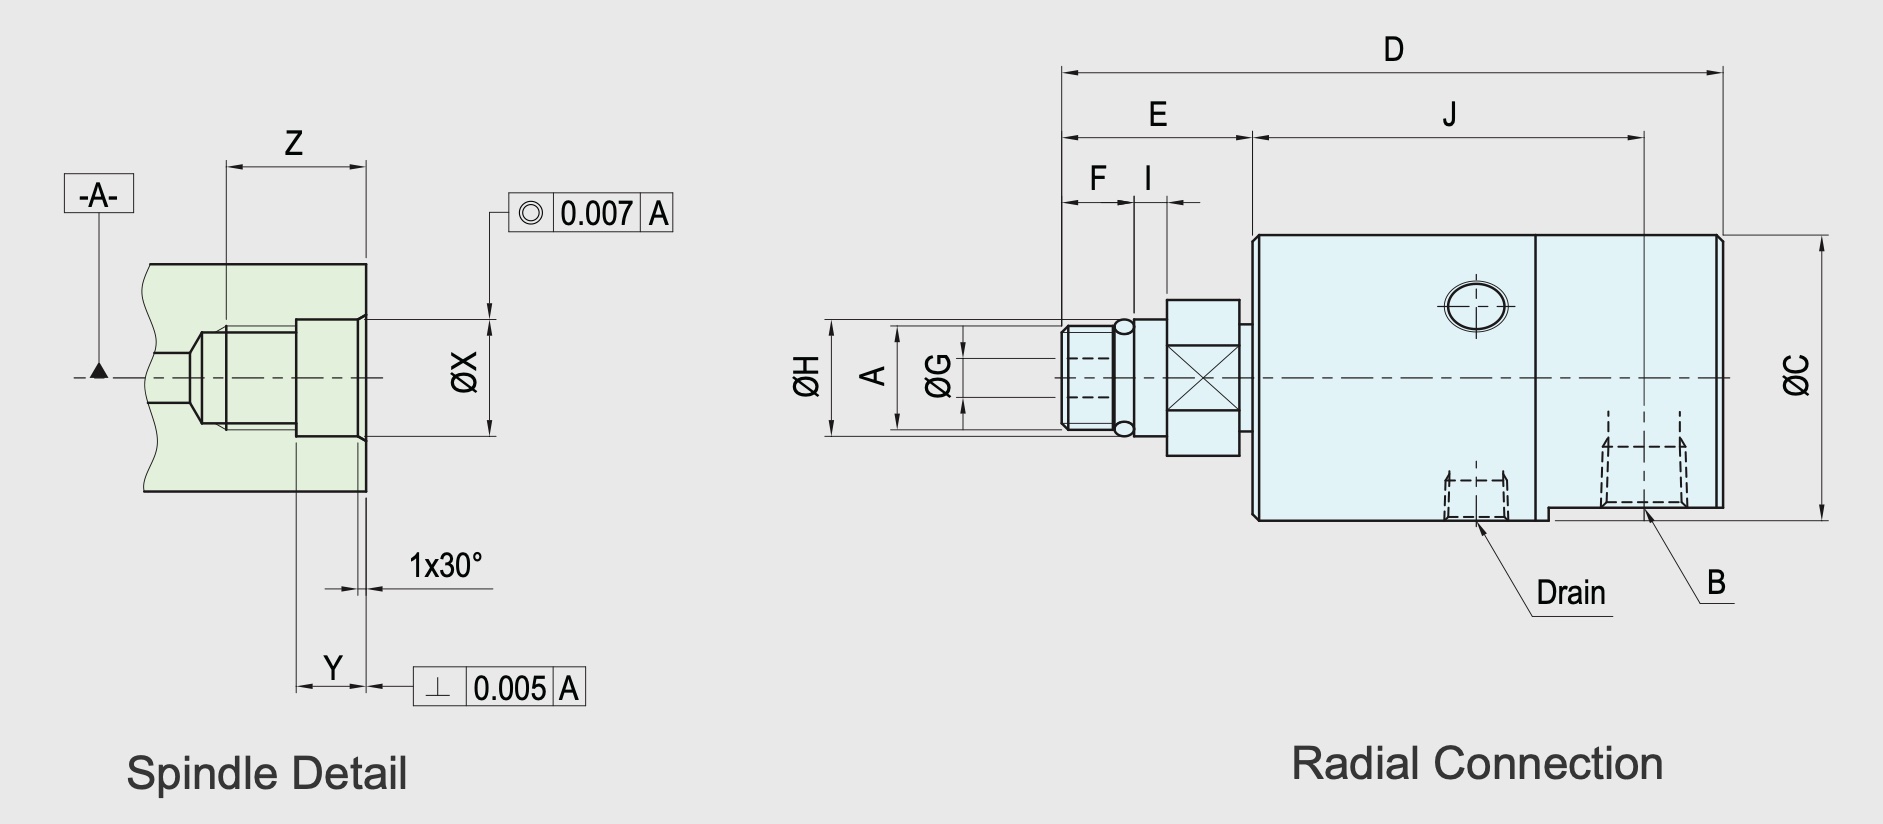 SRJ01-202-15 Technical Drawing Integrated radial type Rotating Union-Rotary Joint for Coolant and Oil with Dry Running